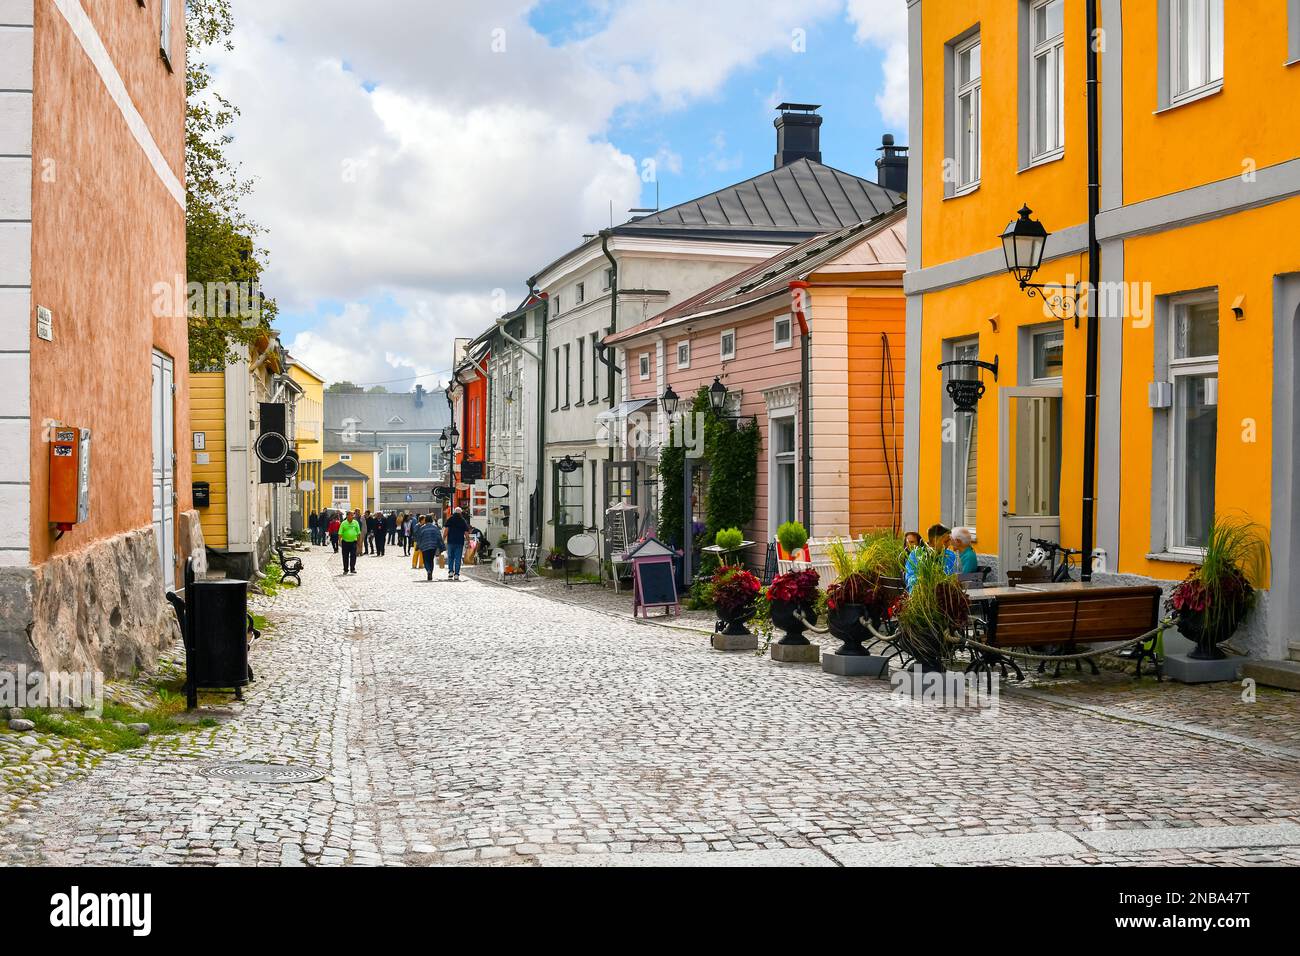 Colorful and picturesque shops, cafes and wooden buildings line the main cobblestone road through the medieval Old Town of Porvoo, Finland. Stock Photo